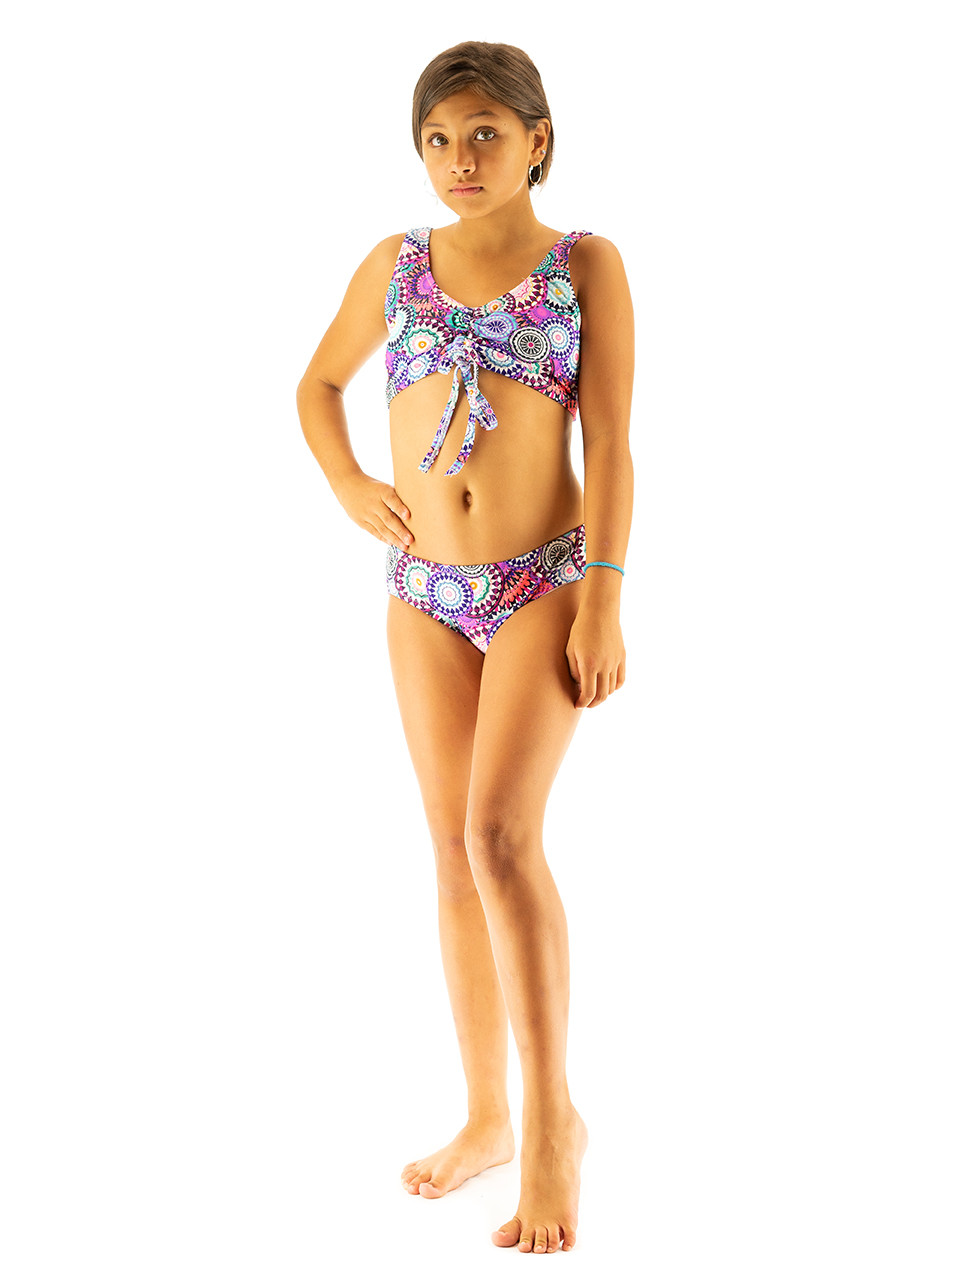 Children Swimsuits - Girls Two Piece Bathing Suit-Tie Front - VF-Sport